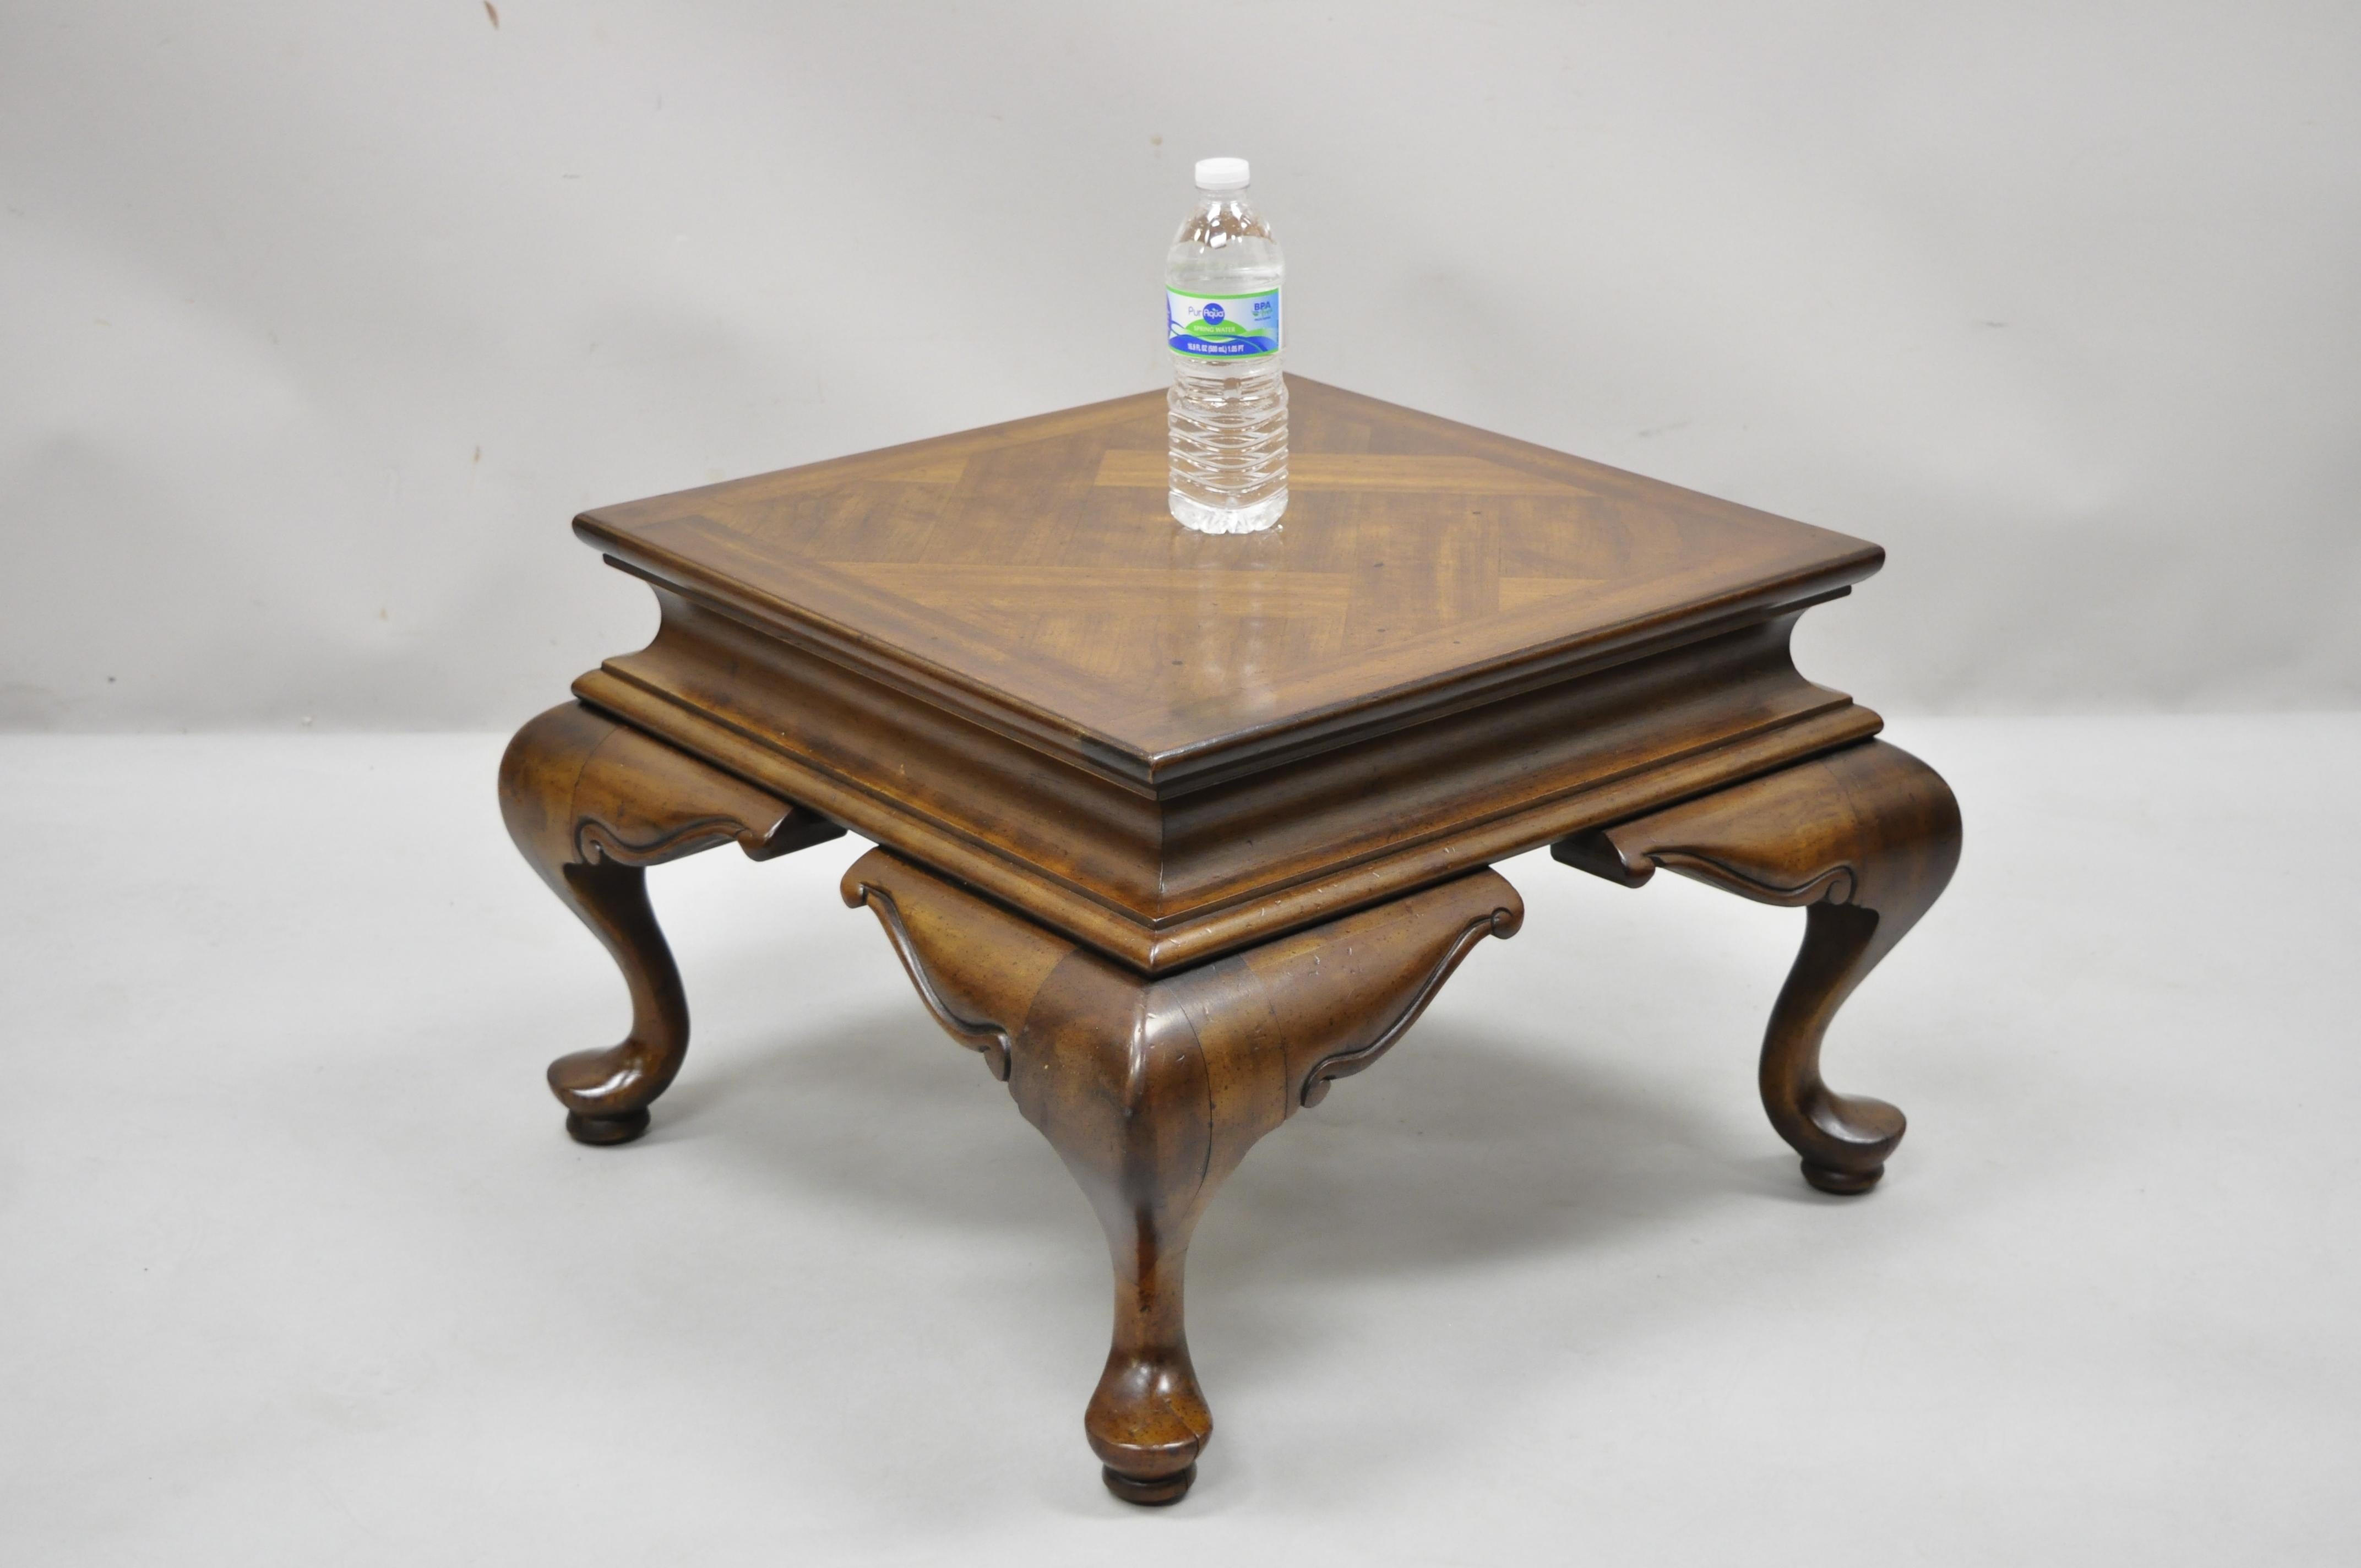 North American Vintage English Queen Anne Low Parquetry Inlay Pedestal Stand Side Table